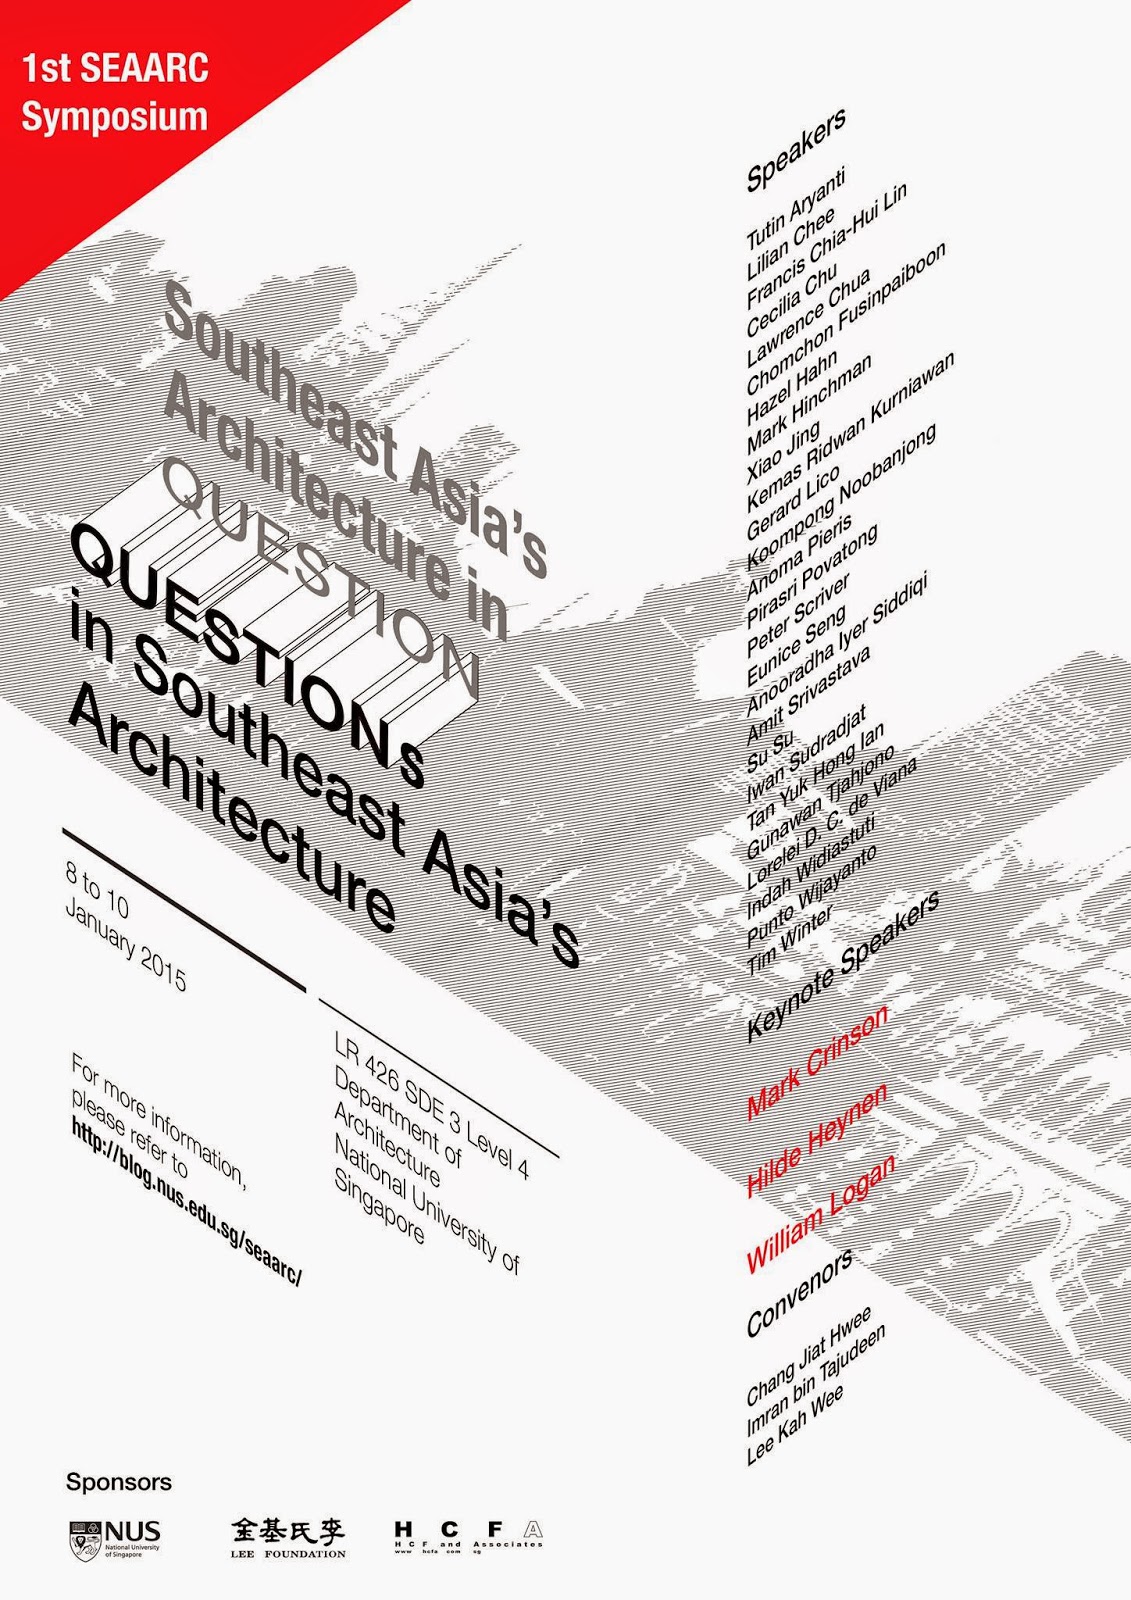 Indah Widiastuti as Speaker in ‘Southeast Asia’s Architecture in QUESTION